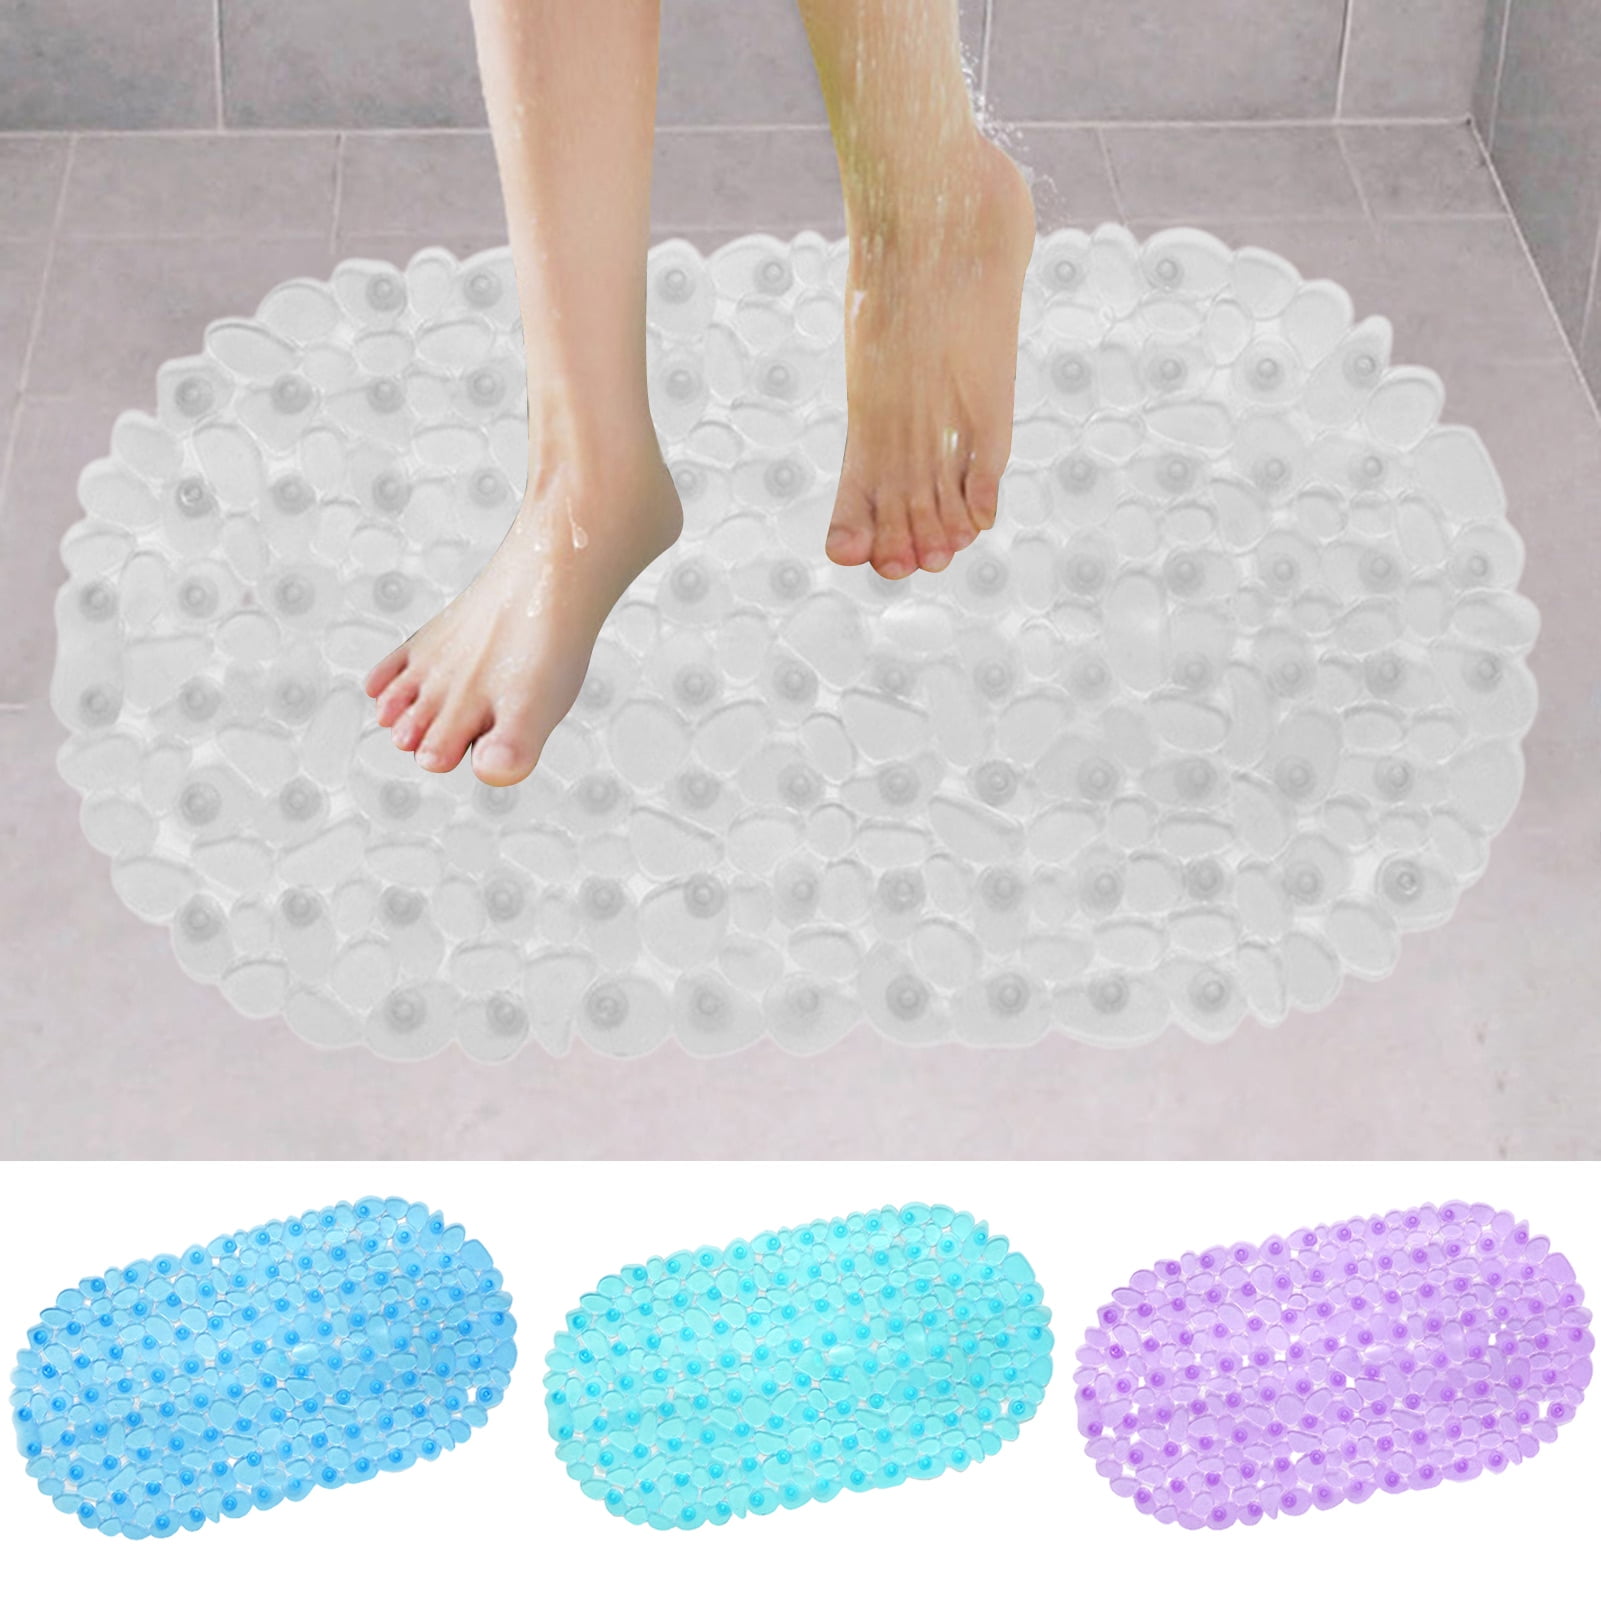 BetterZ Pebble Pattern Bathtub Mat with Suction Cup PVC Anti-skid Colorful  Shower Mat for Door